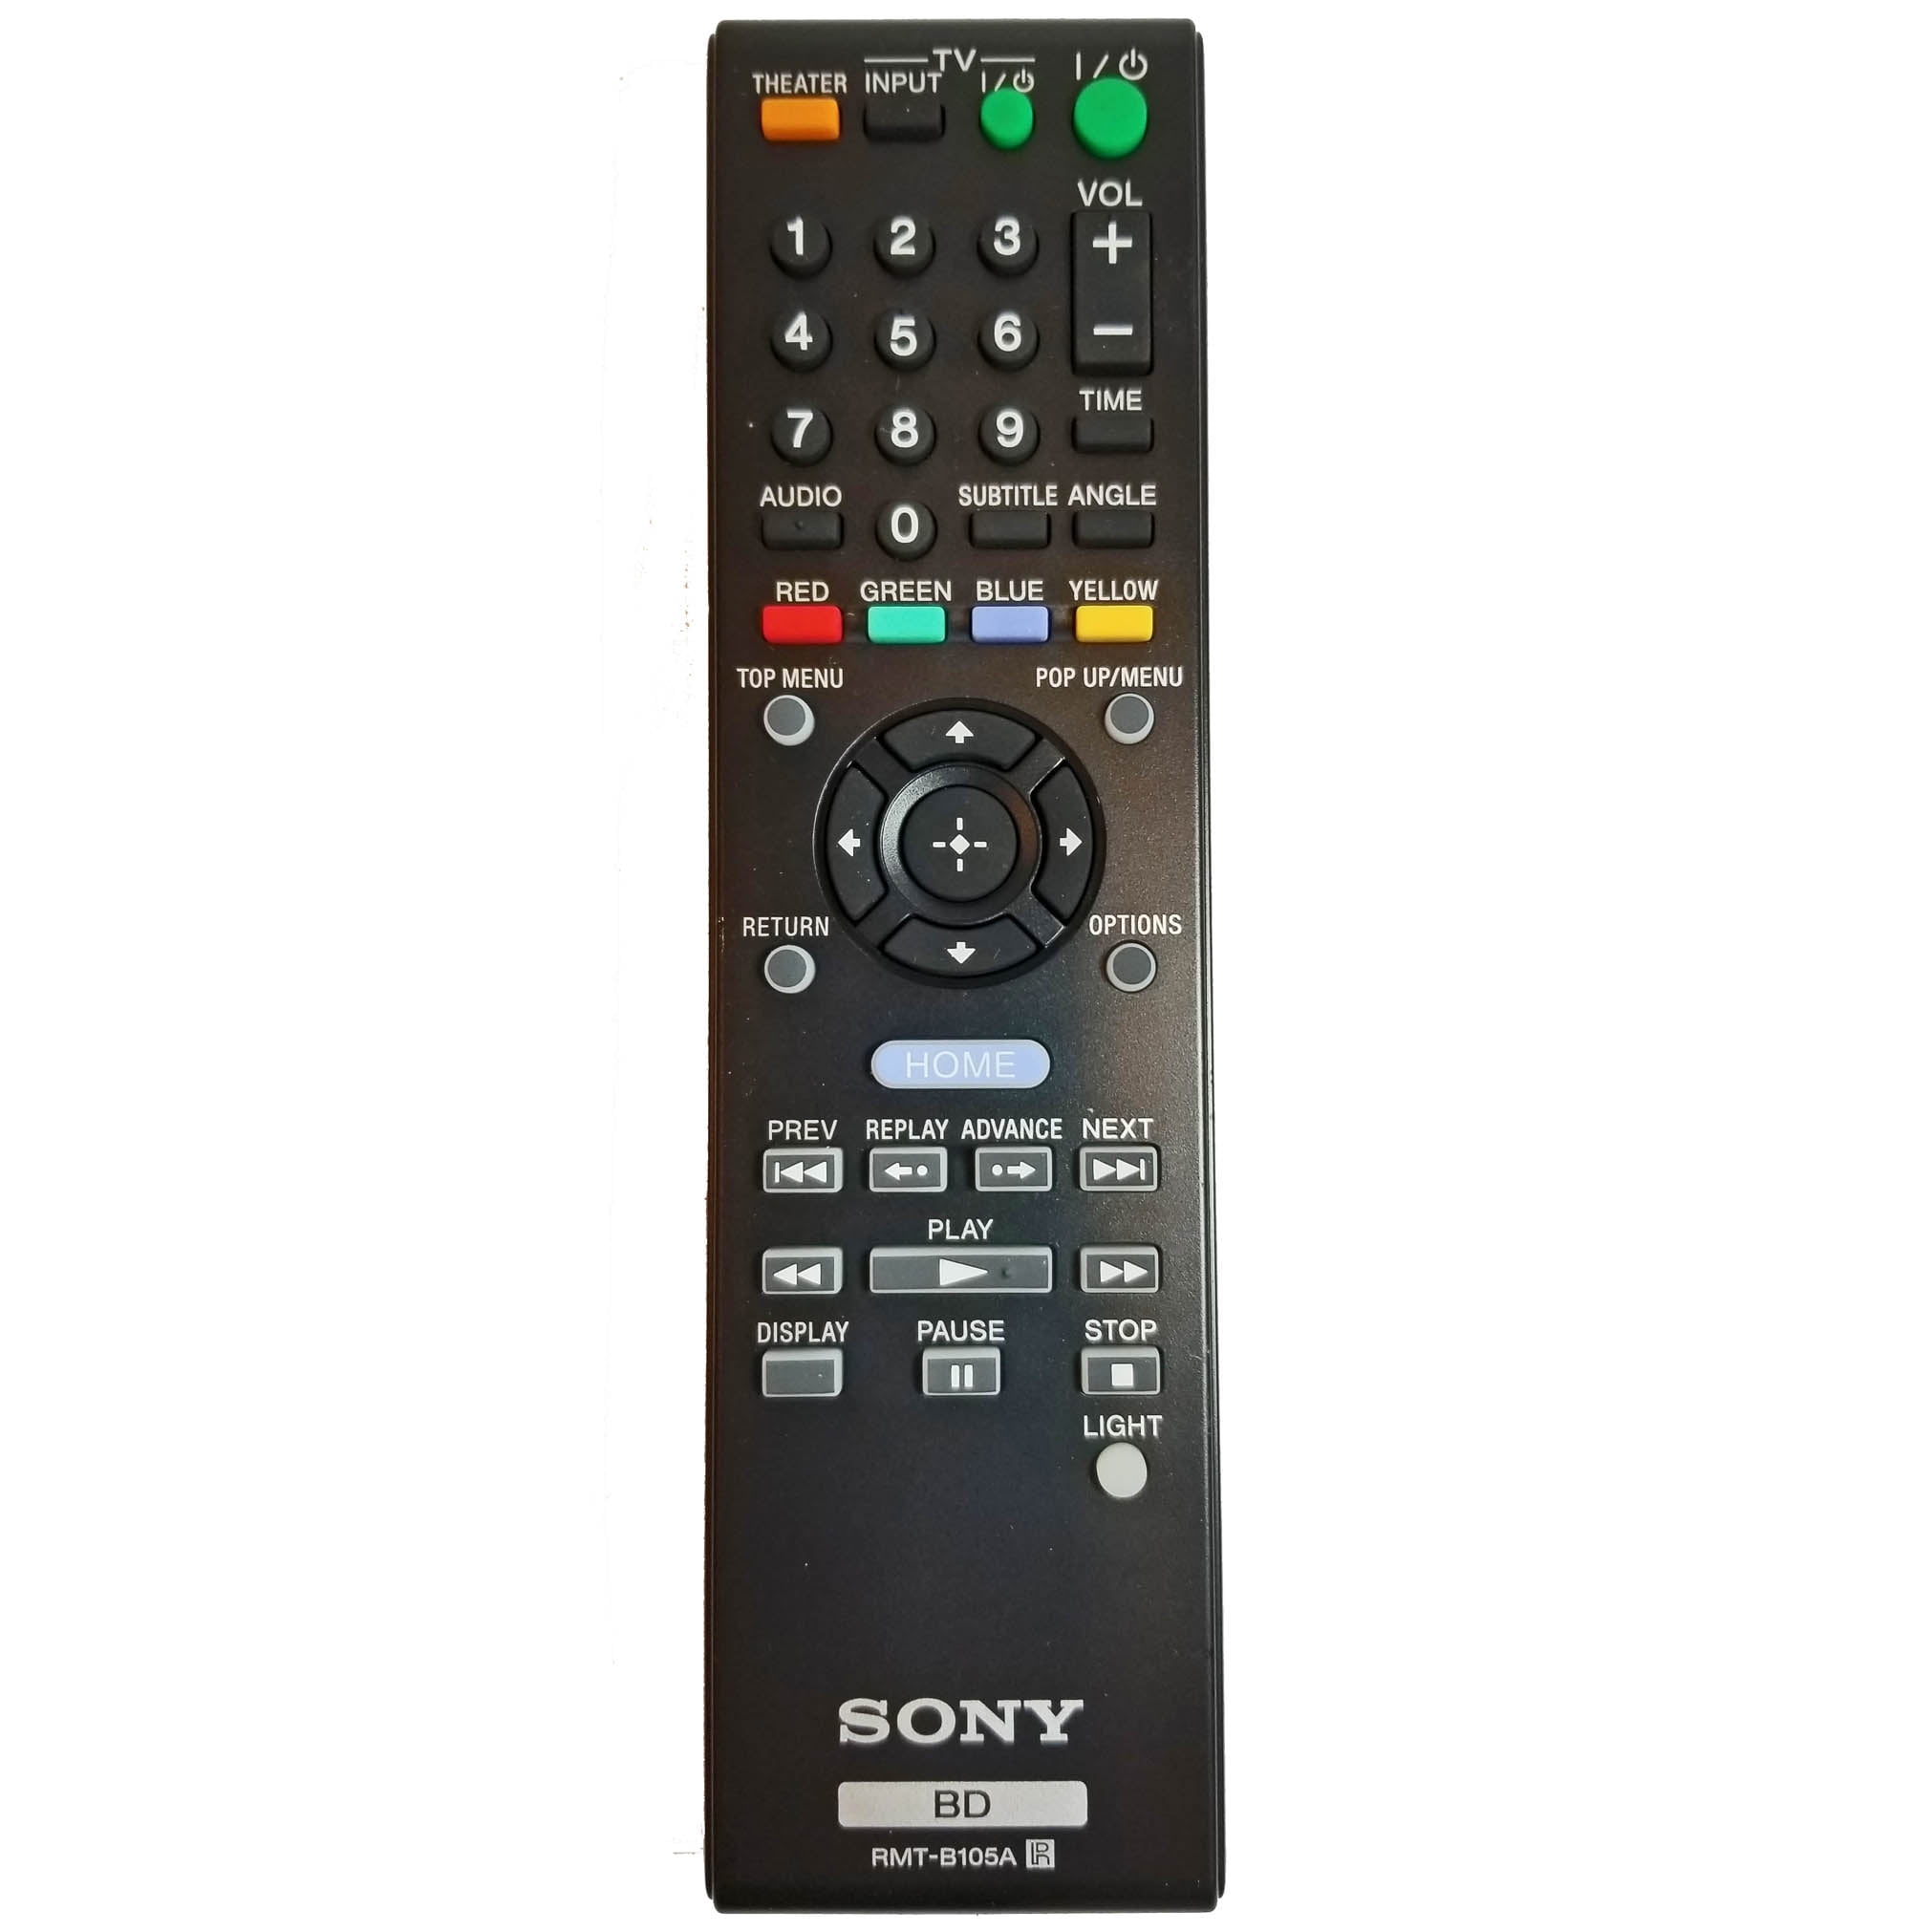 Sony blu ray replacement remote